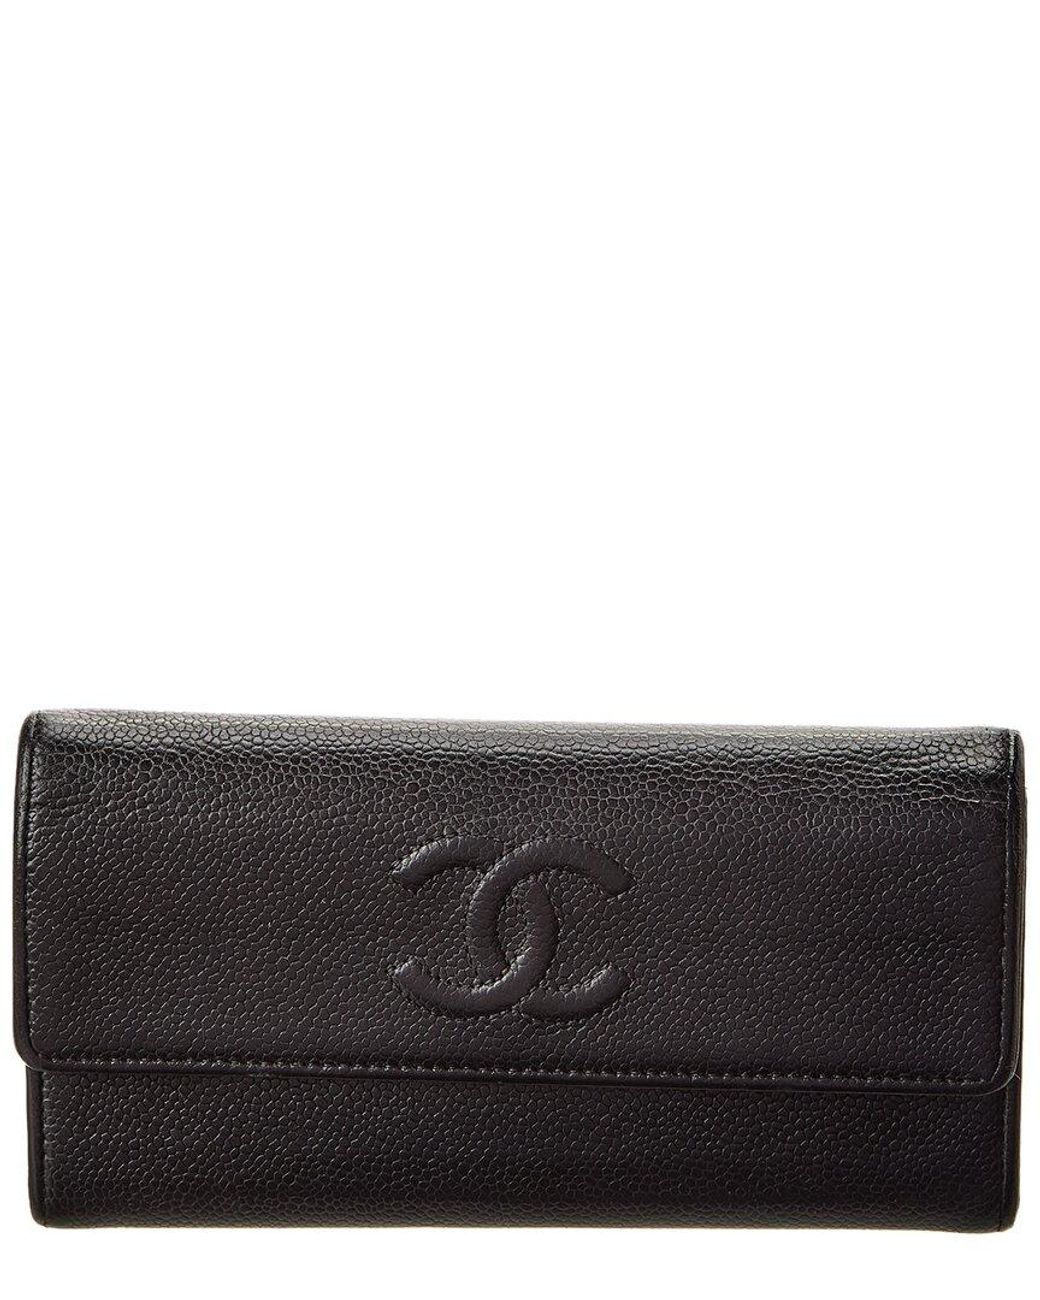 Chanel Trifold Cc Wallet in Black